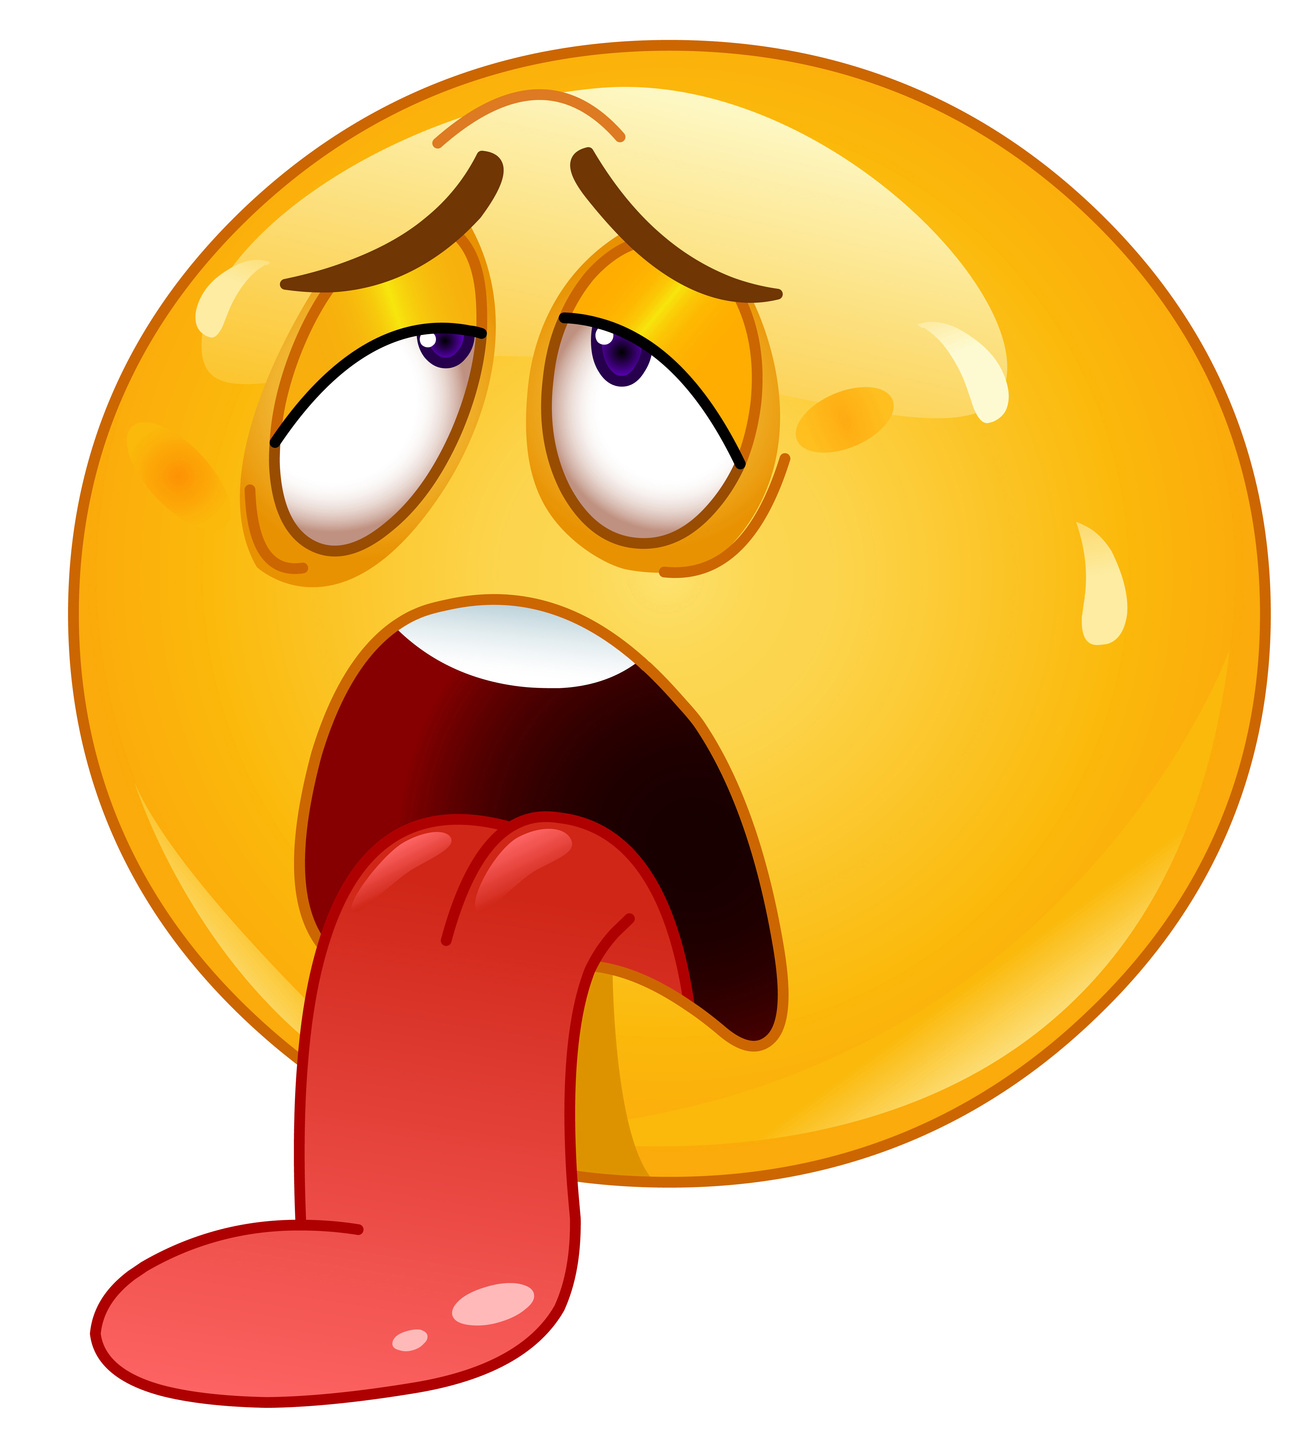 Jaw Dropping Emoticon | Free Download Clip Art | Free Clip Art ...